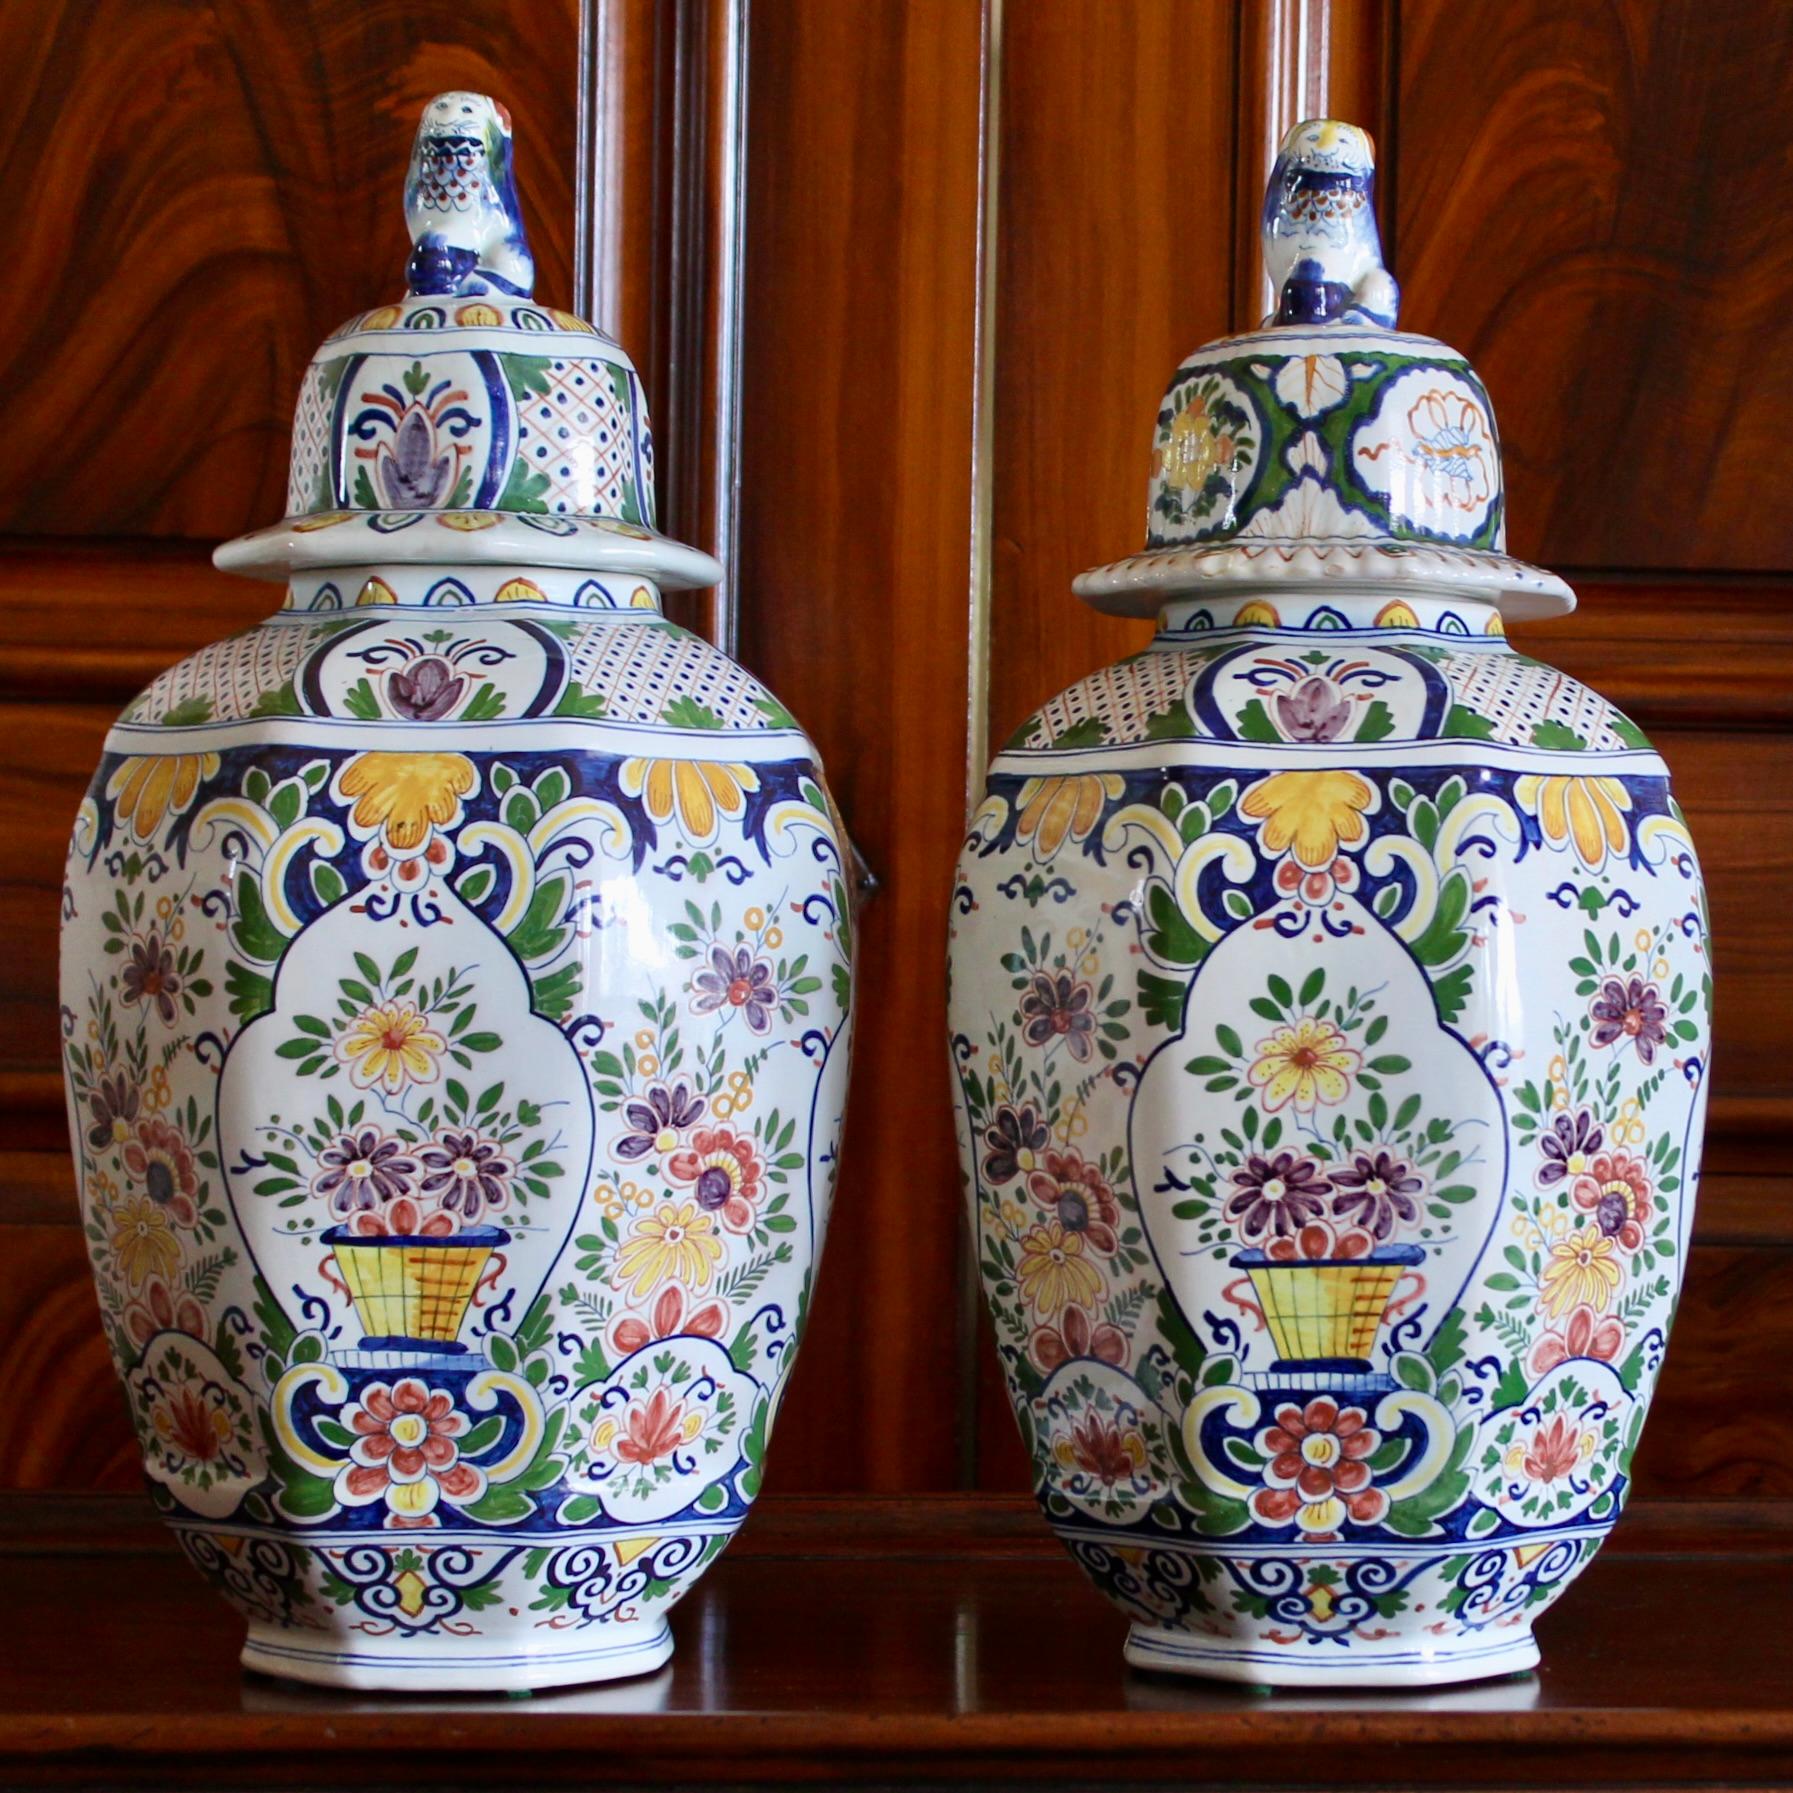 A colorful pair of large octagonal faceted tin glazed Delftware jars with flared and domed lids surmounted by lion figures. Each side is thoroughly decorated with hand painted traditional floral and ornamental designs based on earlier 18th century